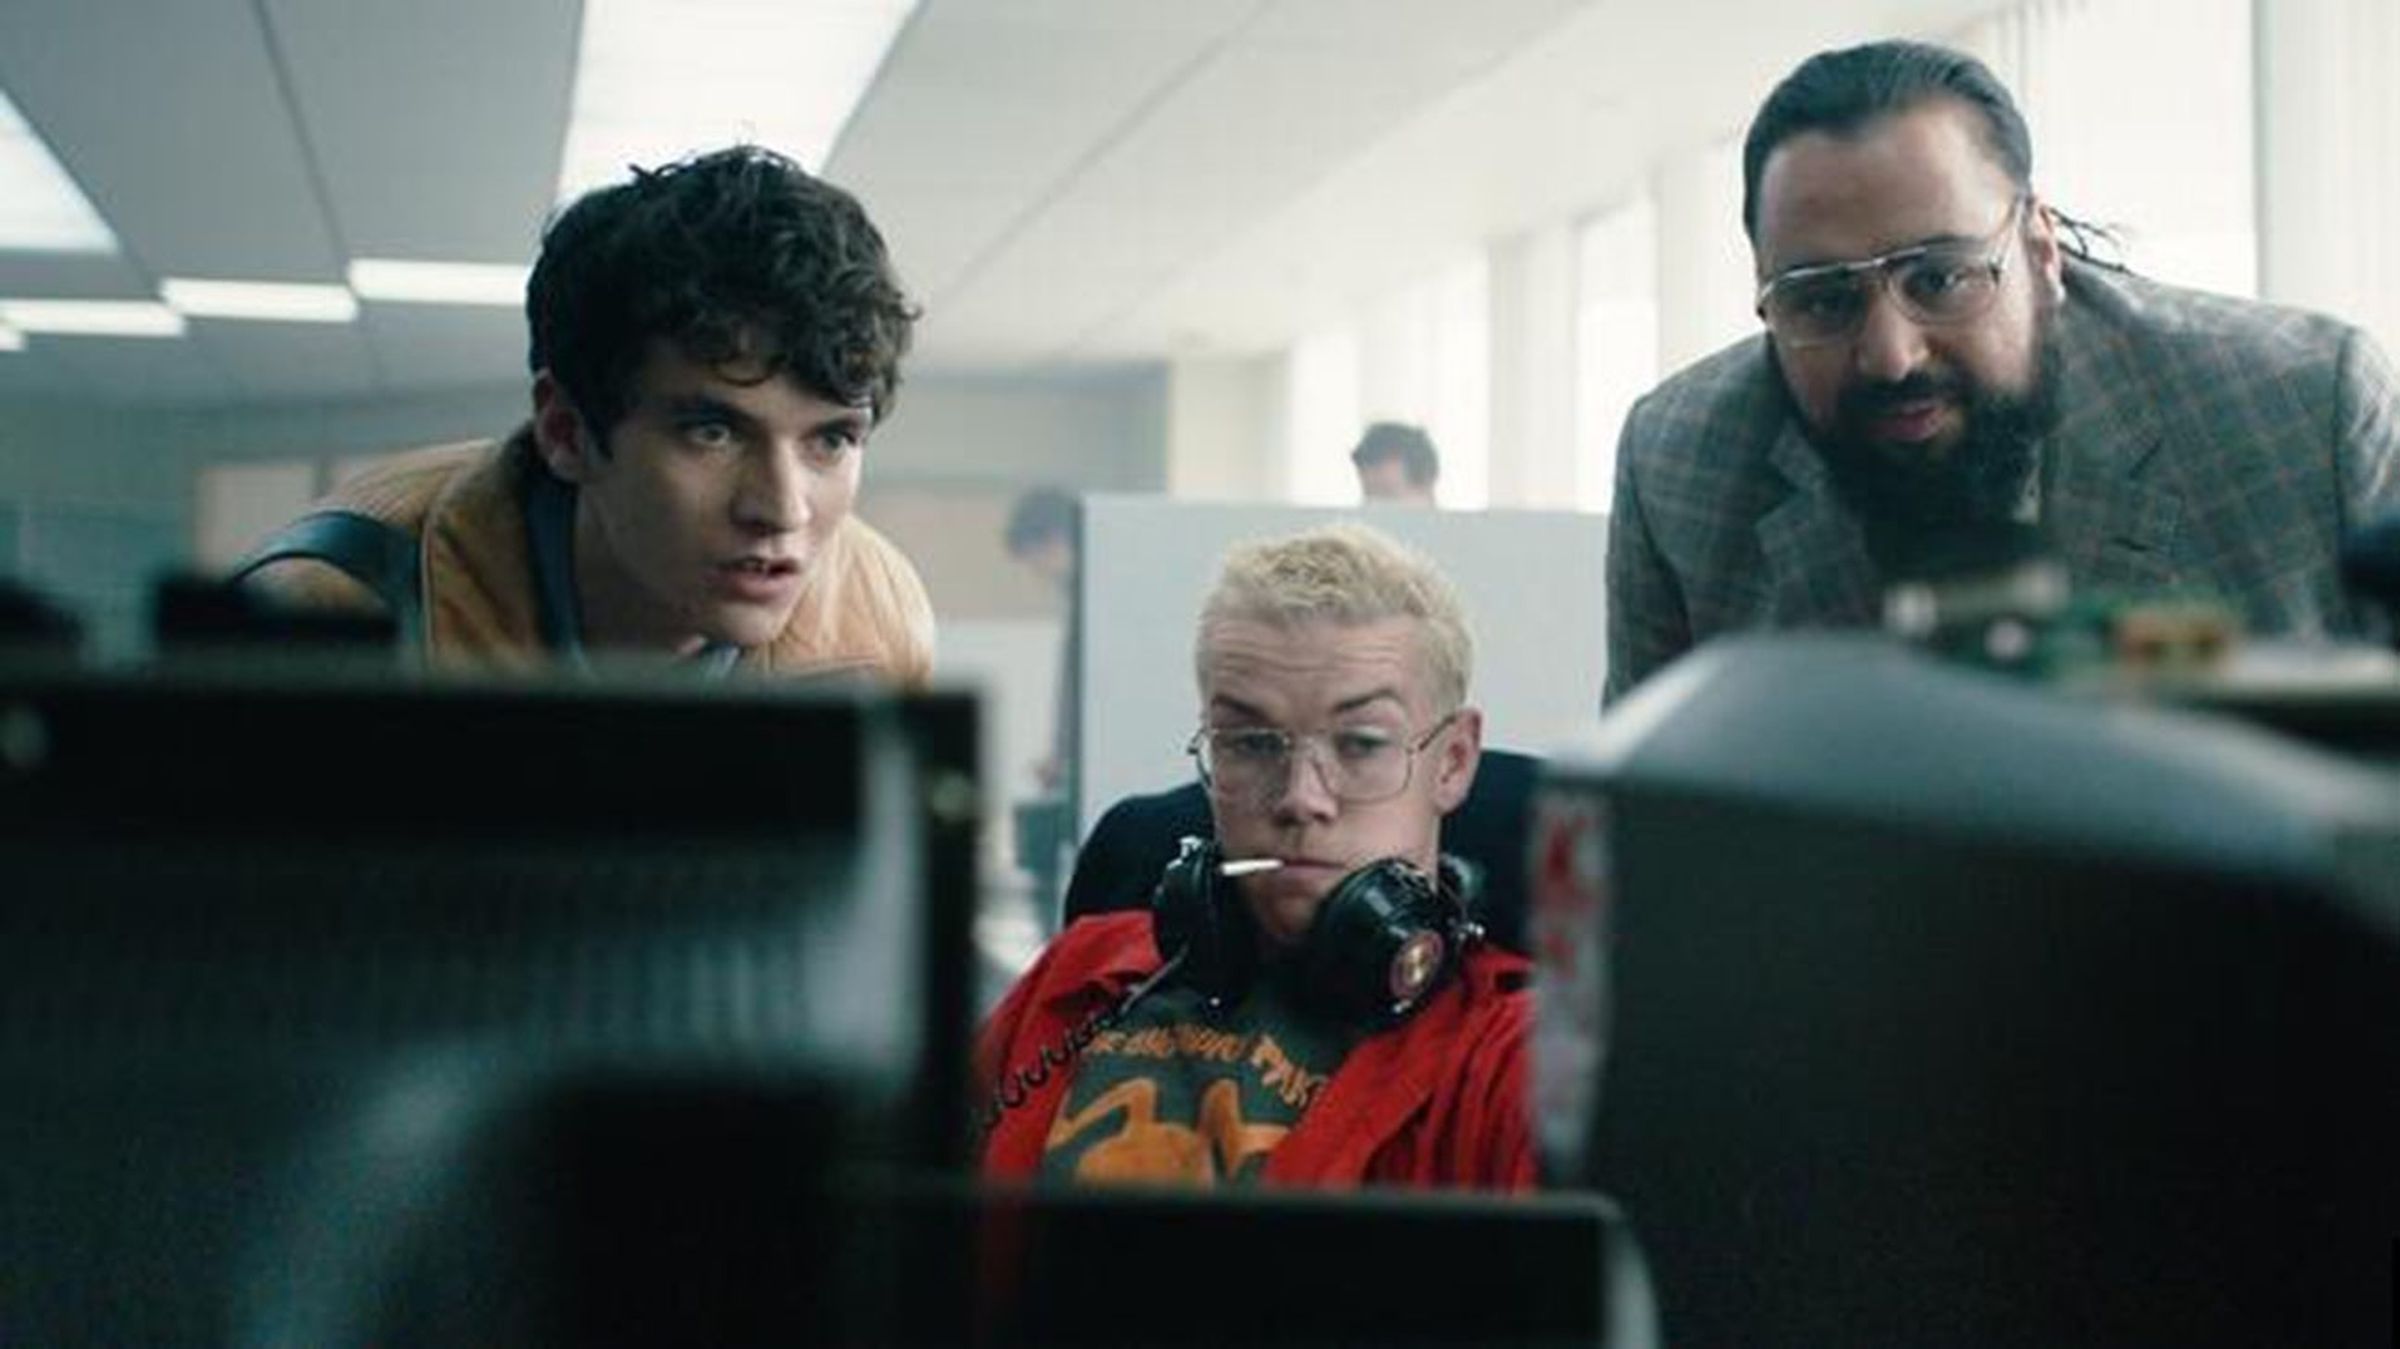 Black Mirror: Bandersnatch features actors Fionn Whitehead, Will Poulter, and Asim Chaudhry.